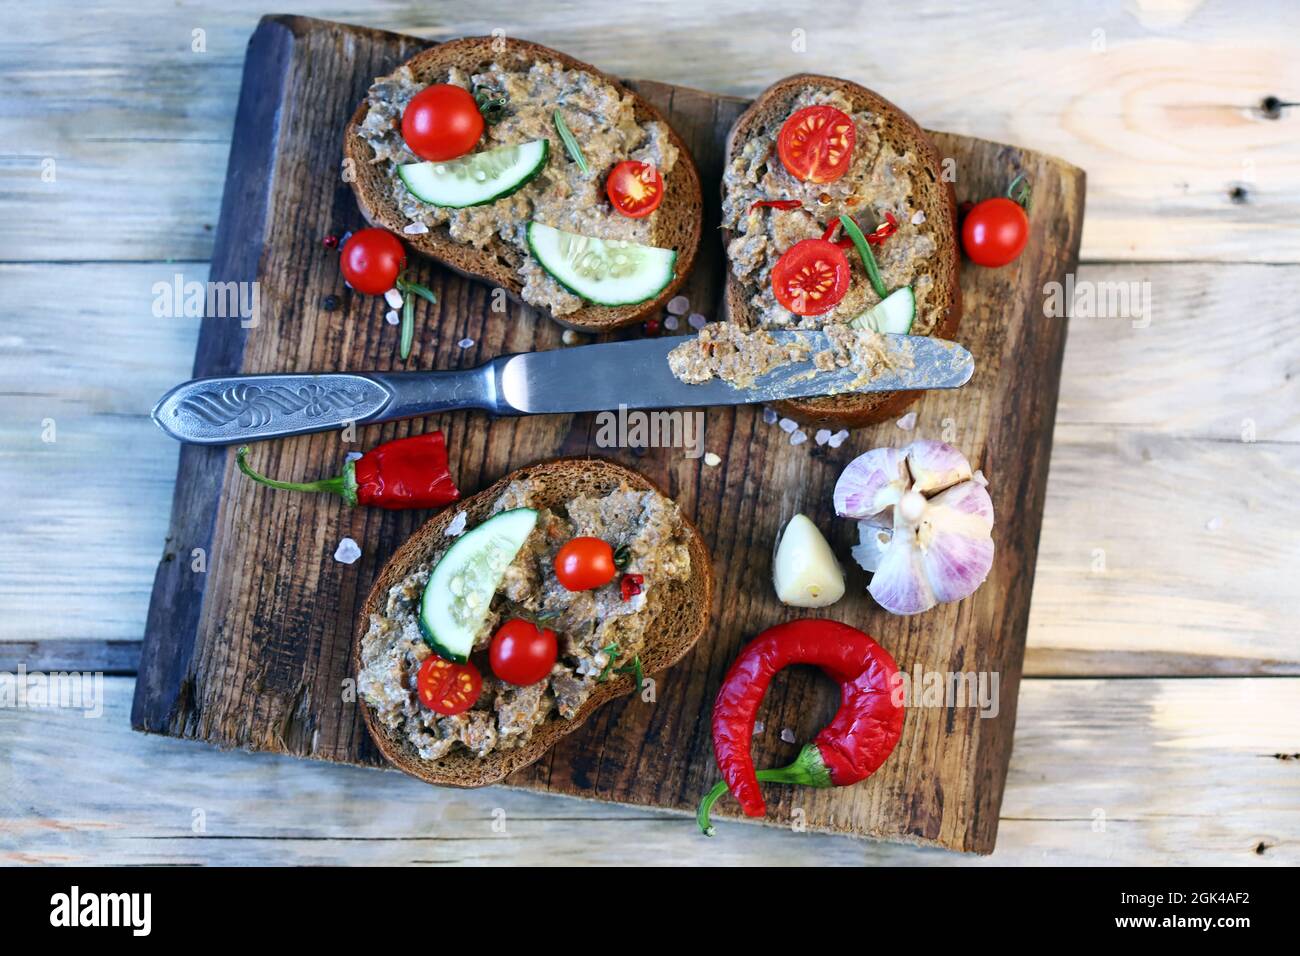 Sandwiches with pate on a wooden board. Healthy snack. The keto diet. Stock Photo